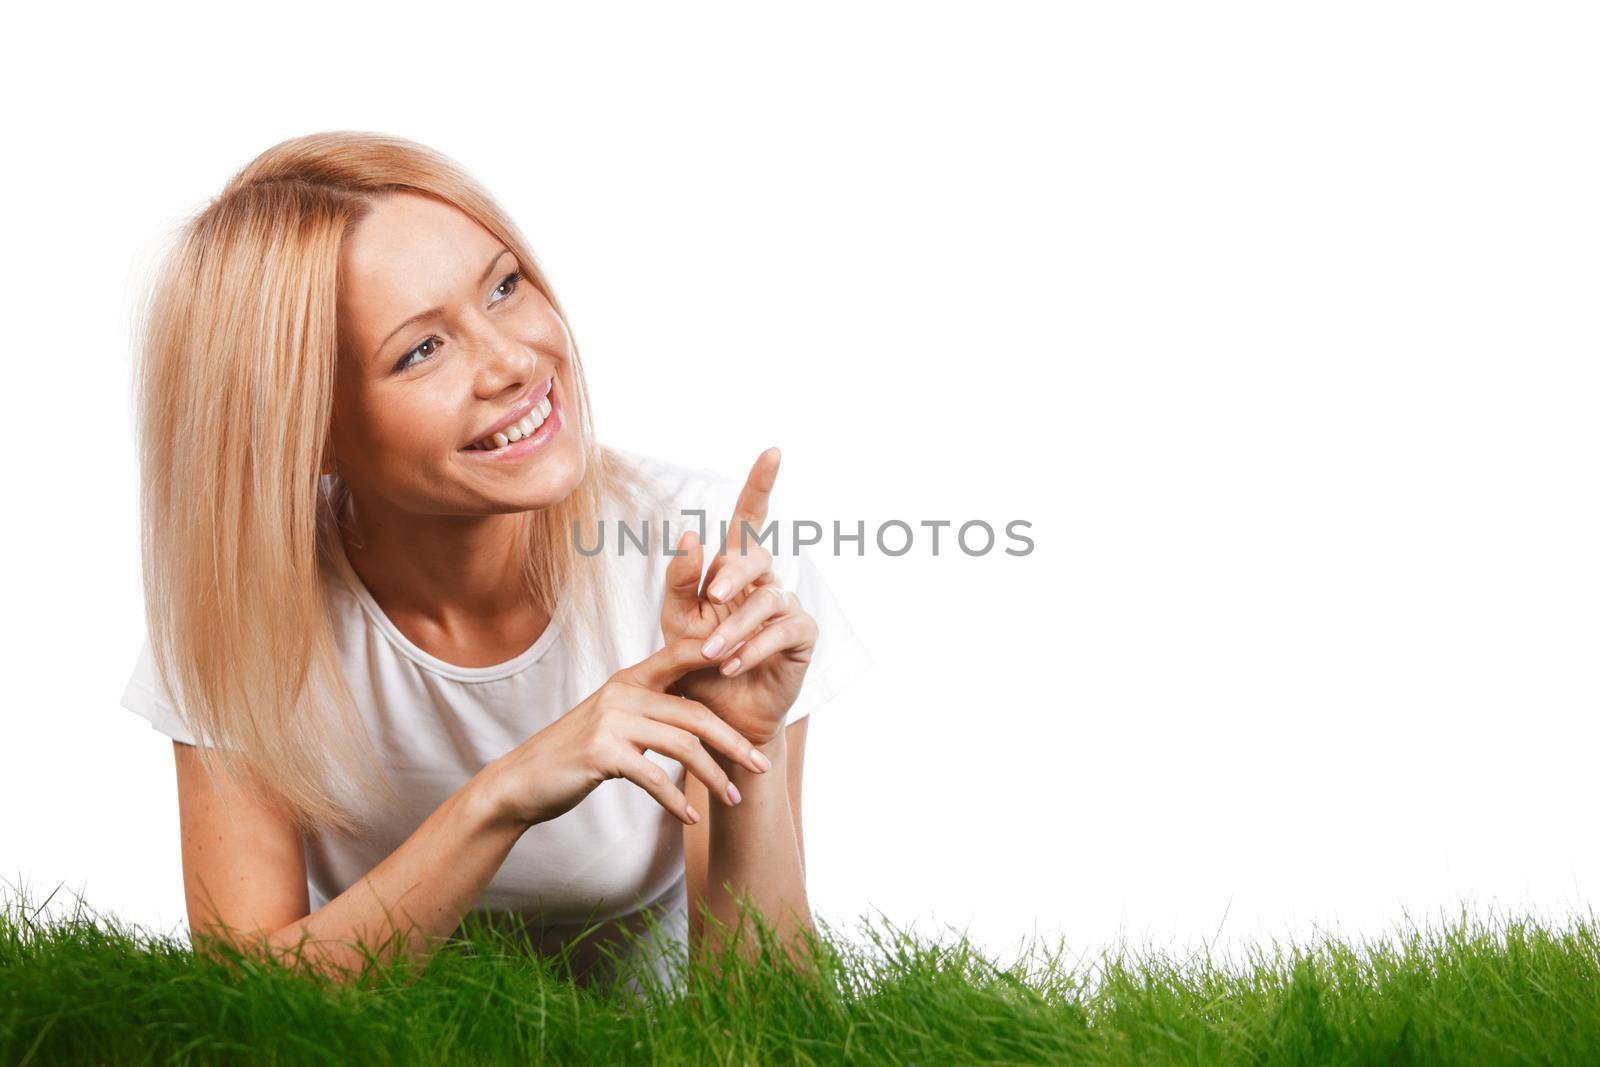 Smiling woman on grass by Yellowj